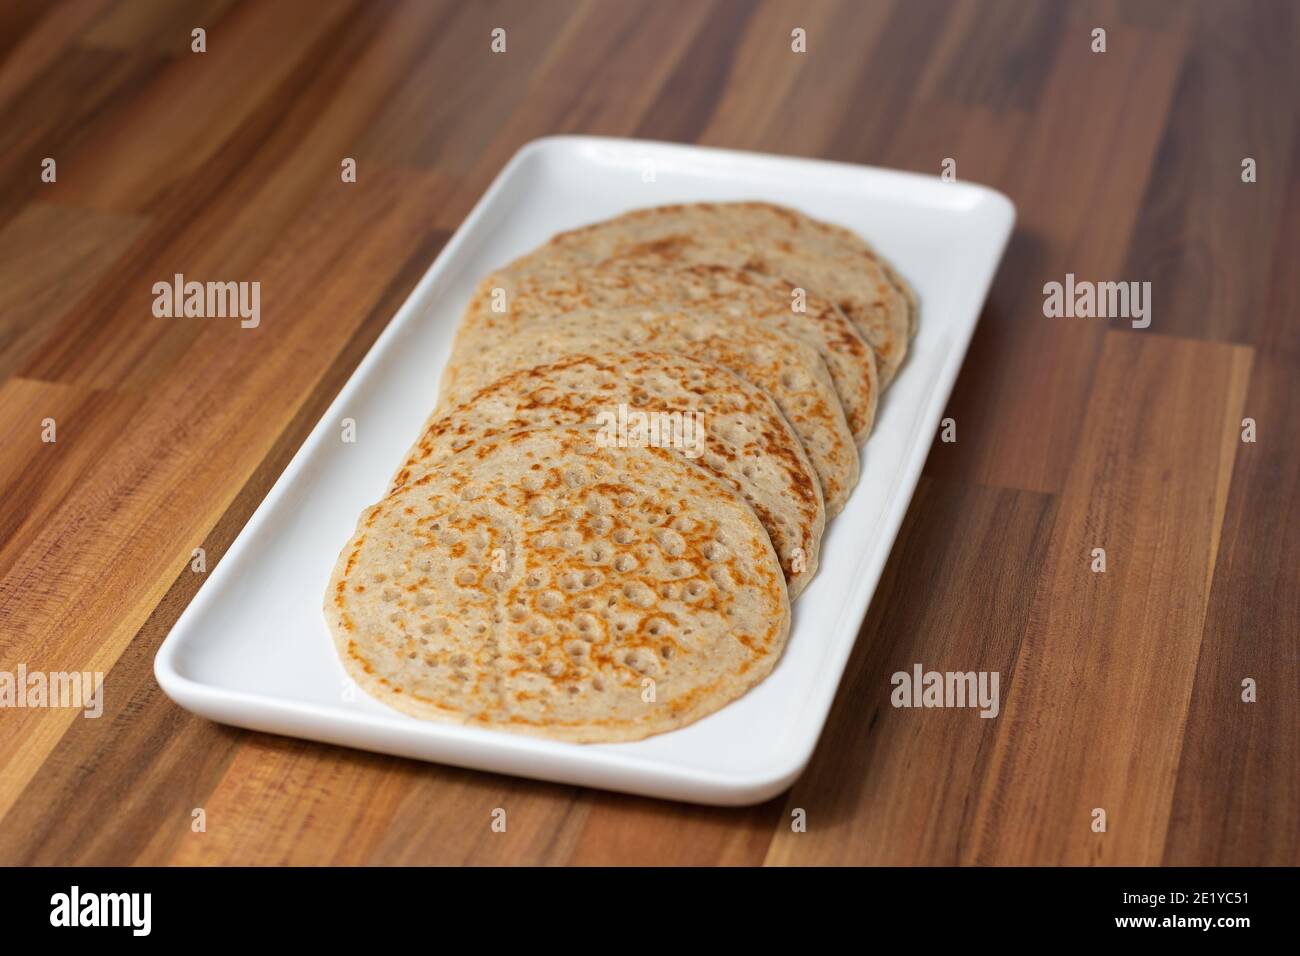 Derbyshire oatcakes on a white platter viewed from an angle with a wooden backdrop Stock Photo